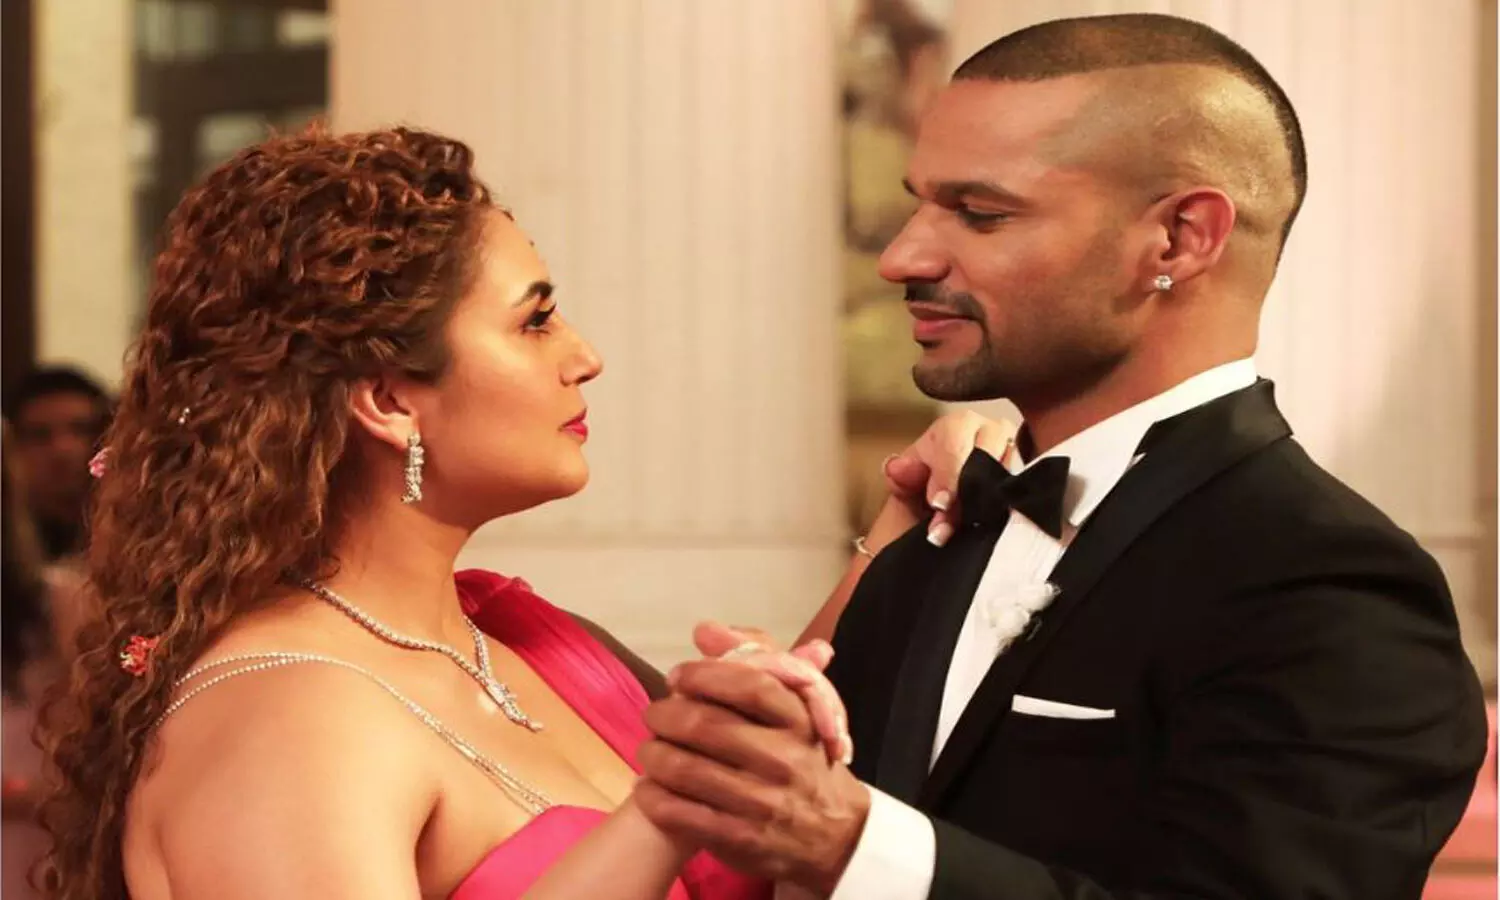 Shikhar Dhawan to star in Double XL with Sonakshi Sinha and Huma Qureshi